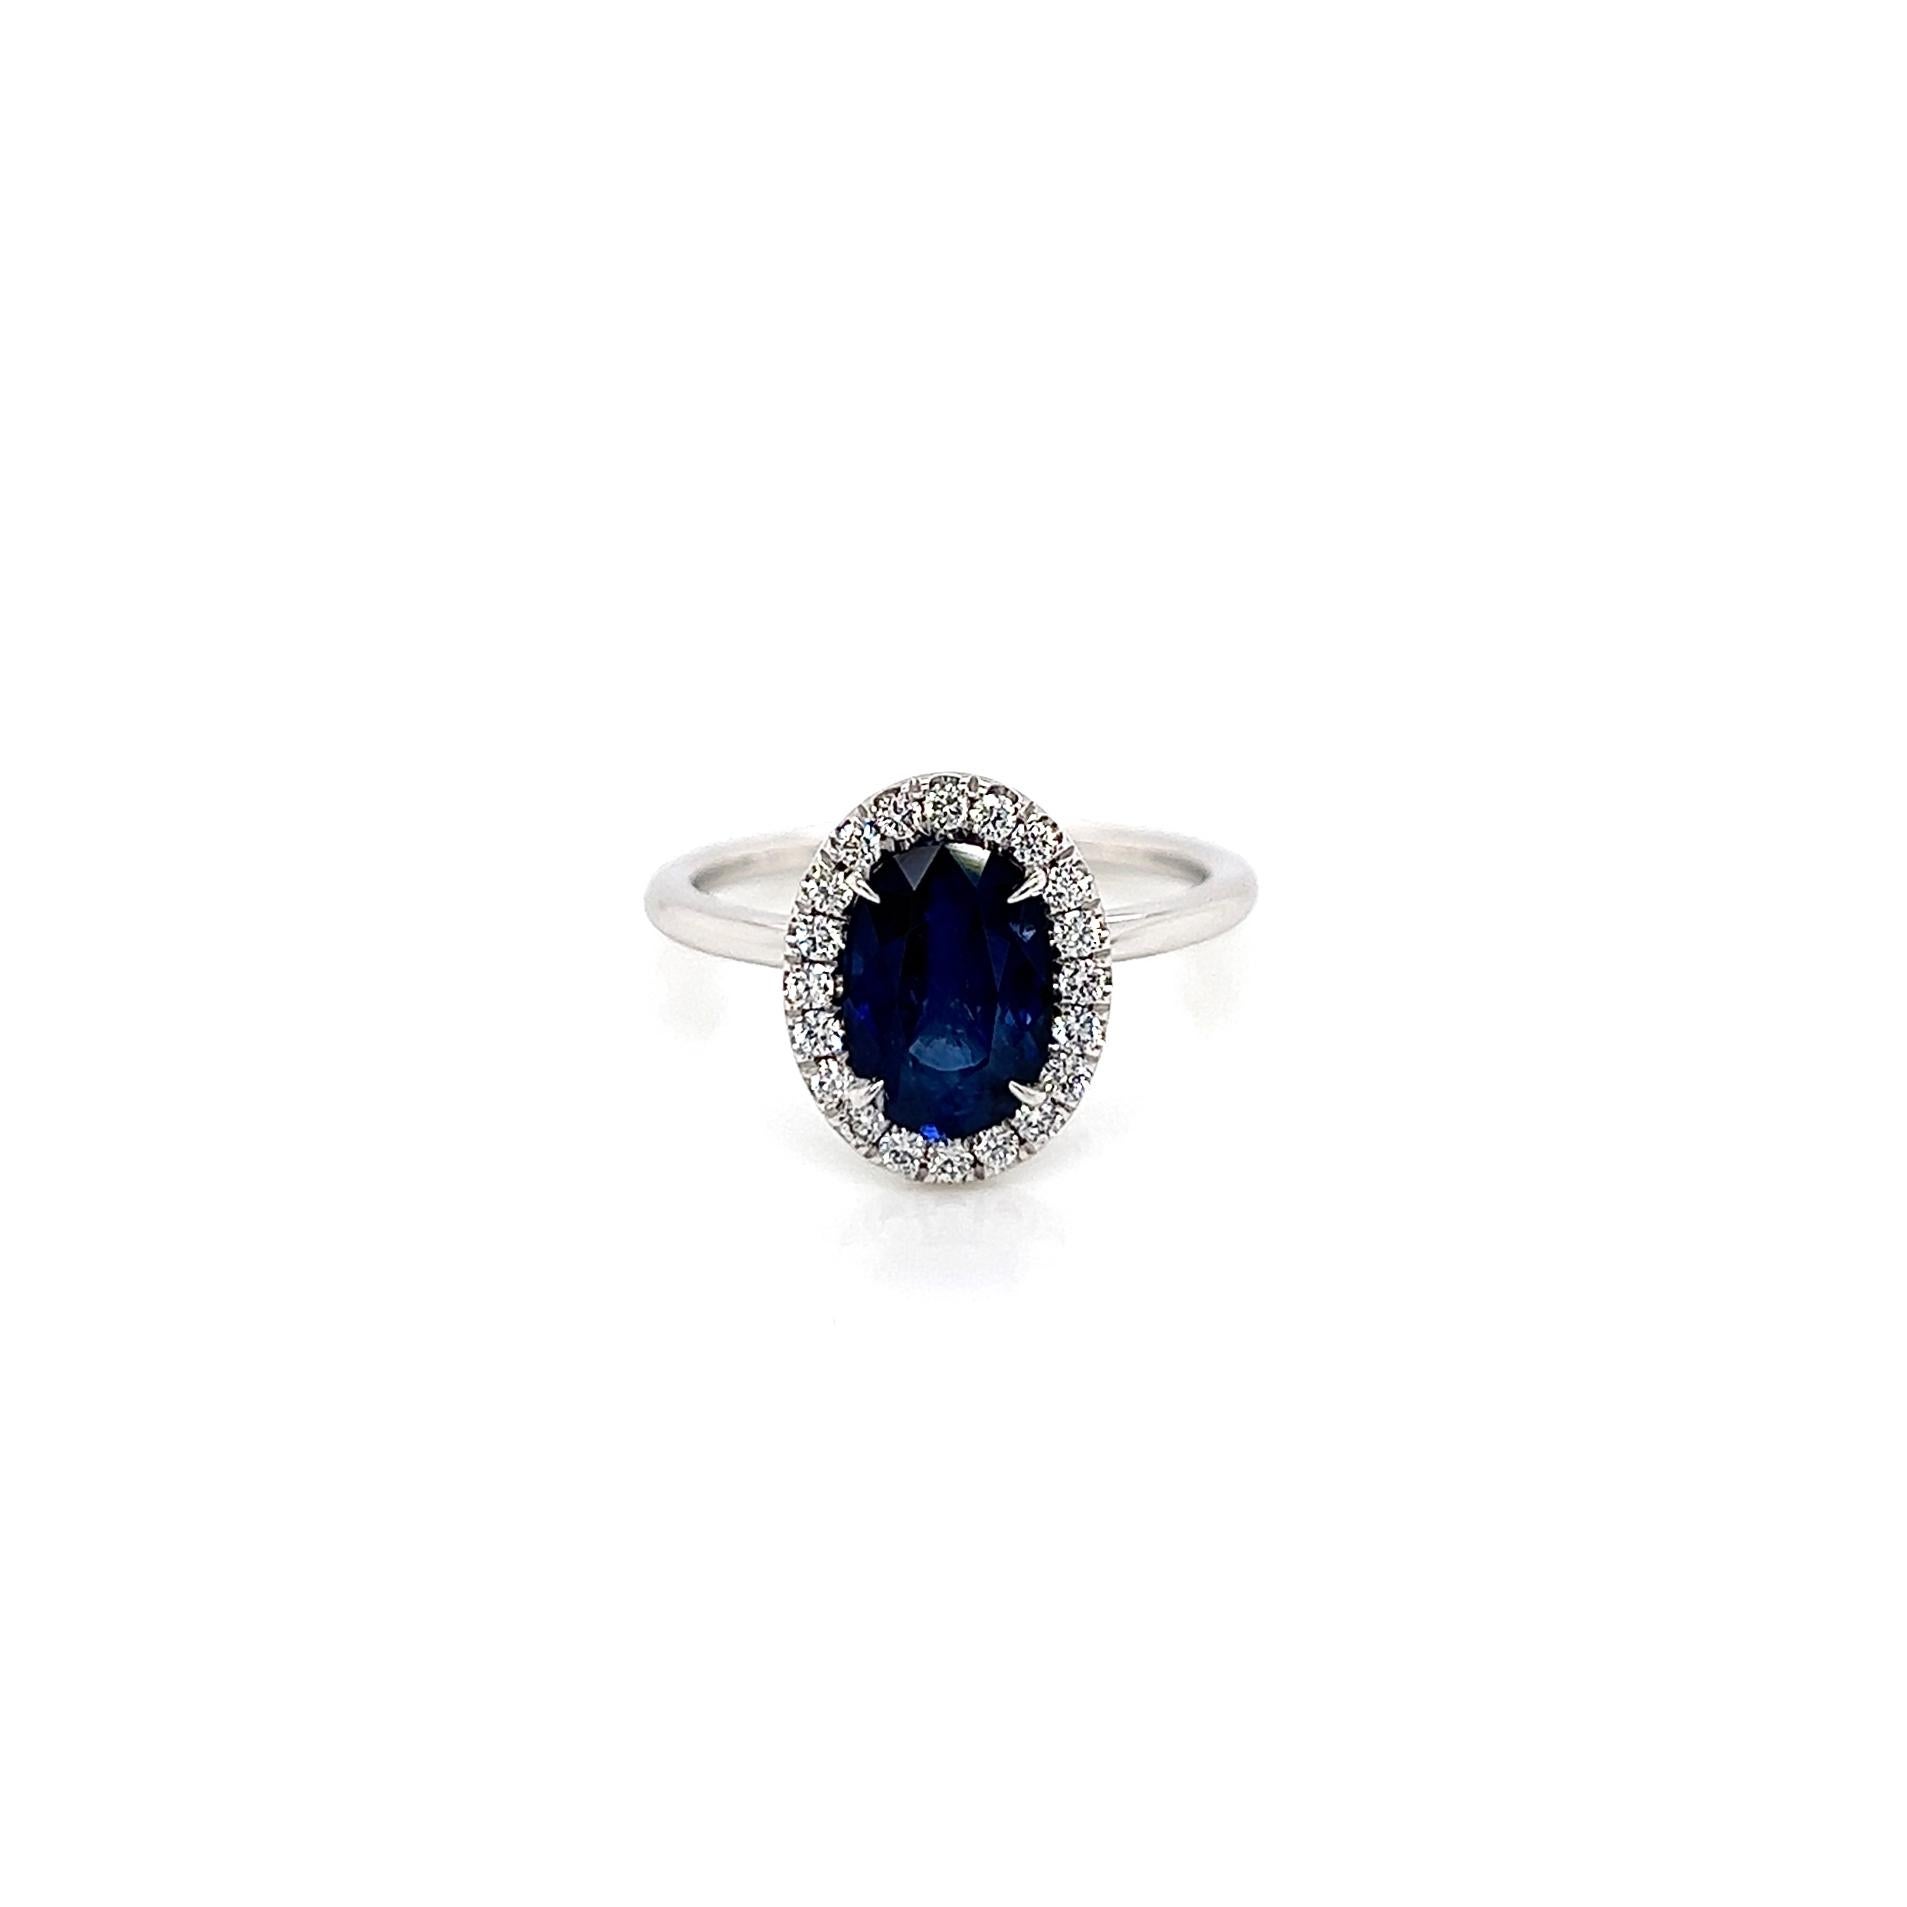 2.29 Total Carat Sapphire Diamond Ladies Ring

-Metal Type: 18K White Gold
-1.97 Carat Oval Cut Blue Sapphire
-0.32 Carat Round Side Natural Diamonds
-Size 6.0

Made in New York City